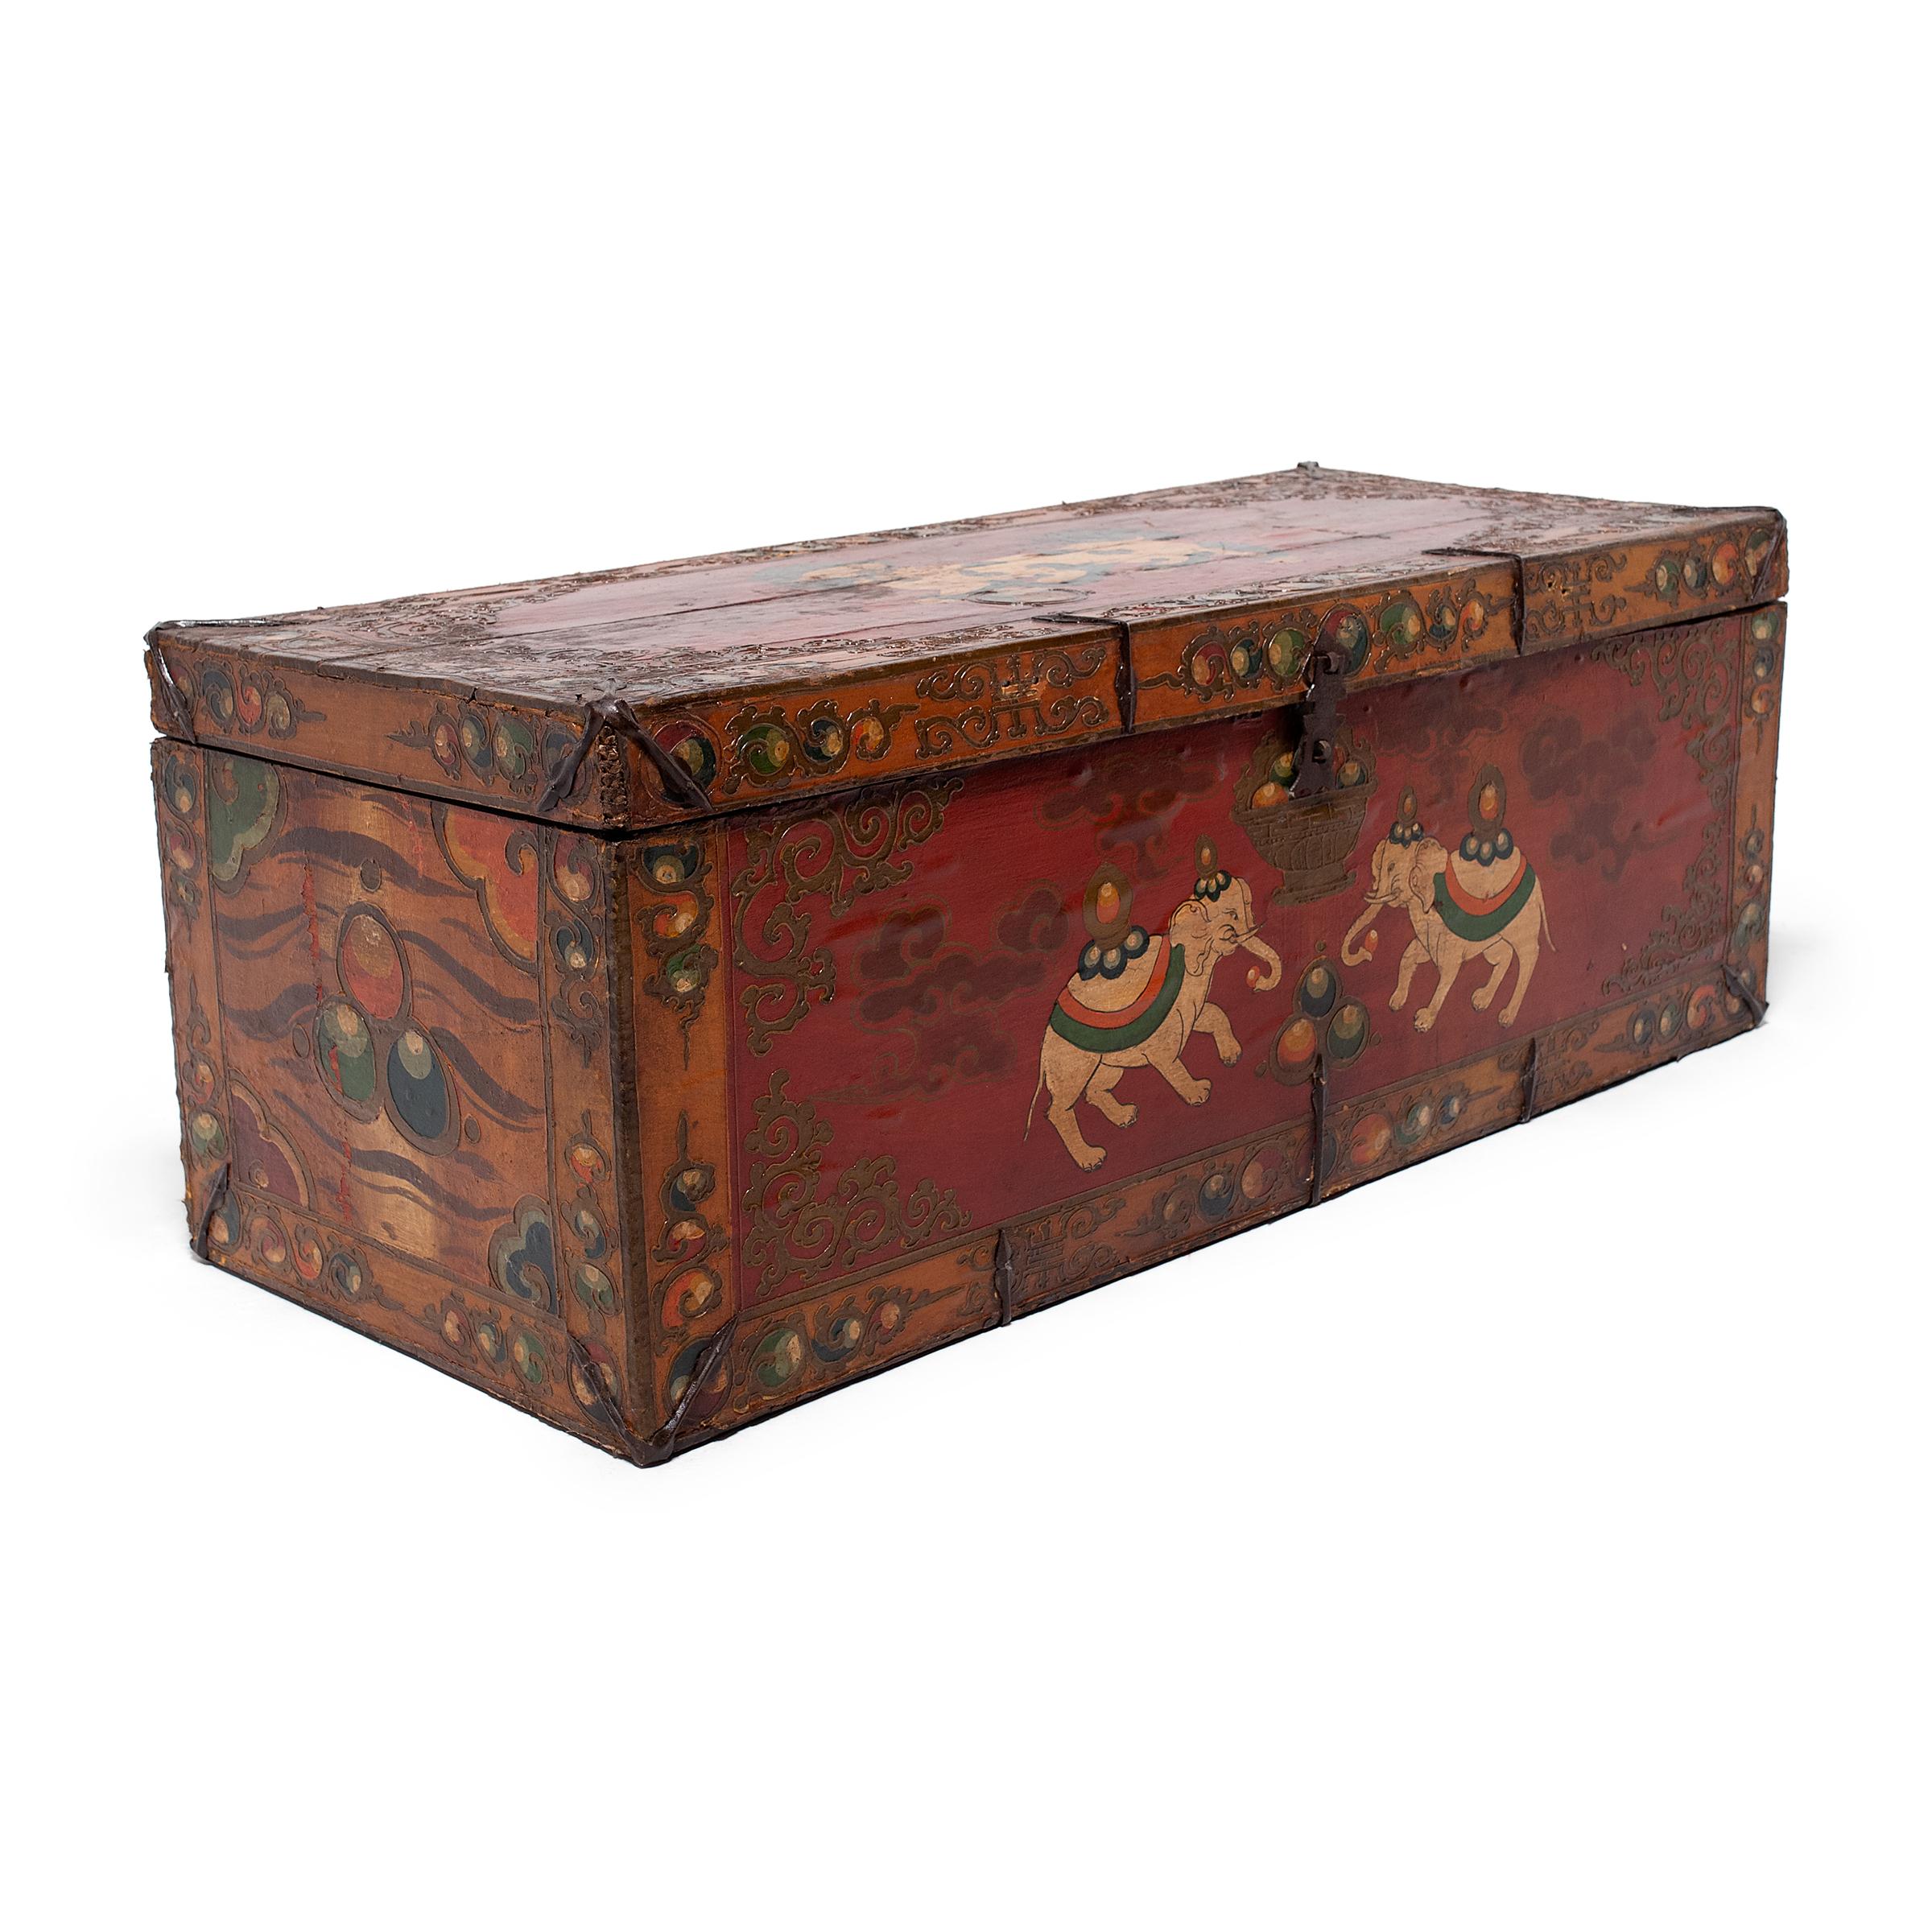 This fantastic painted trunk from northern China is lavishly decorated from end to end in the Tibetan style with a rich palette of red, orange, and green. Raised outlines and layers of glossy lacquer lend the chest rich texture and catch the light